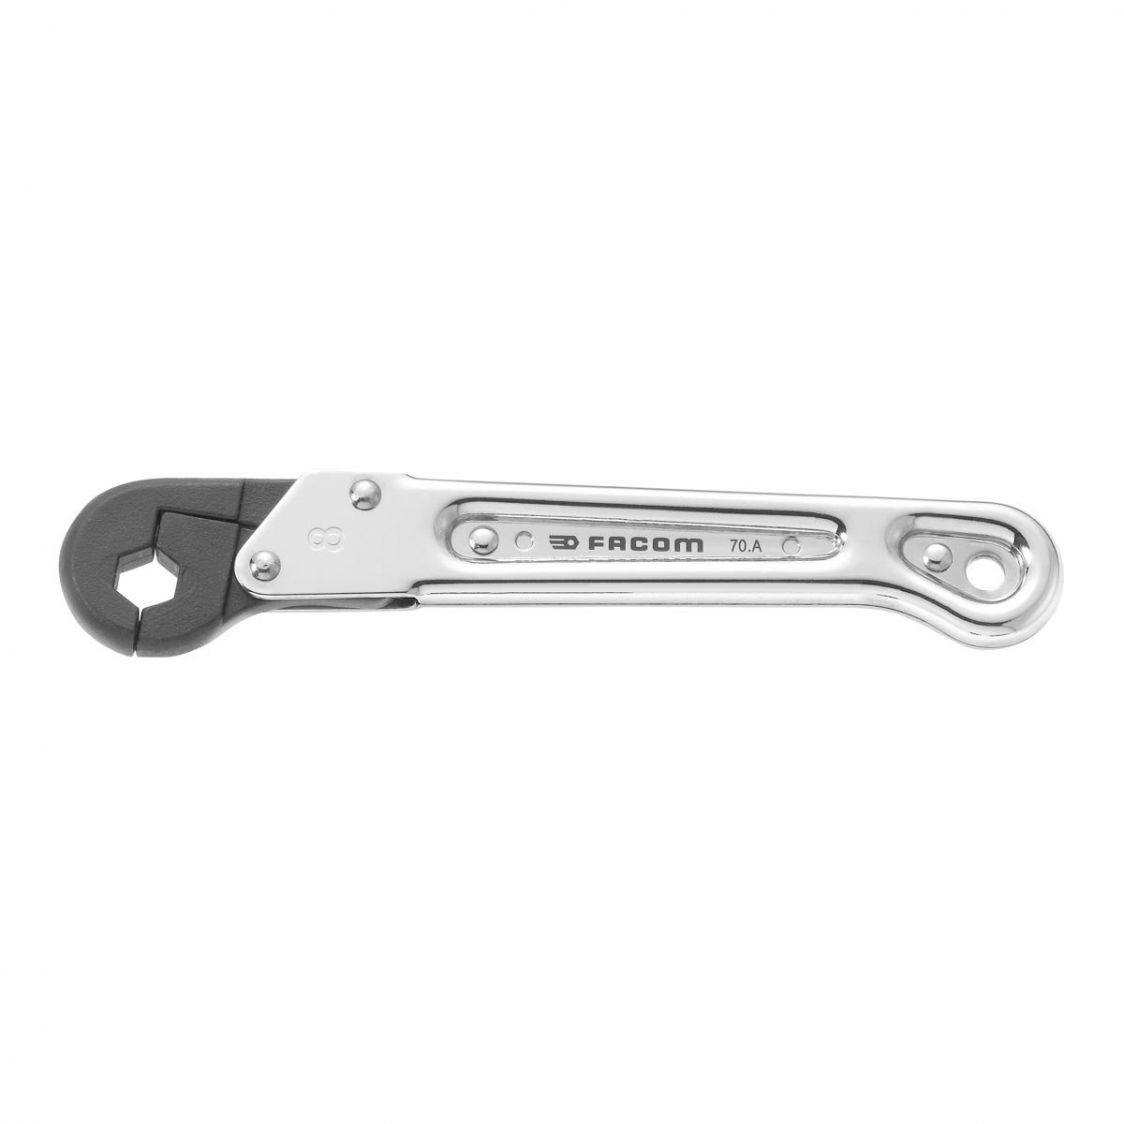 FACOM 70A.17 - 17mm Metric Ratchet Flare Nut Spanner